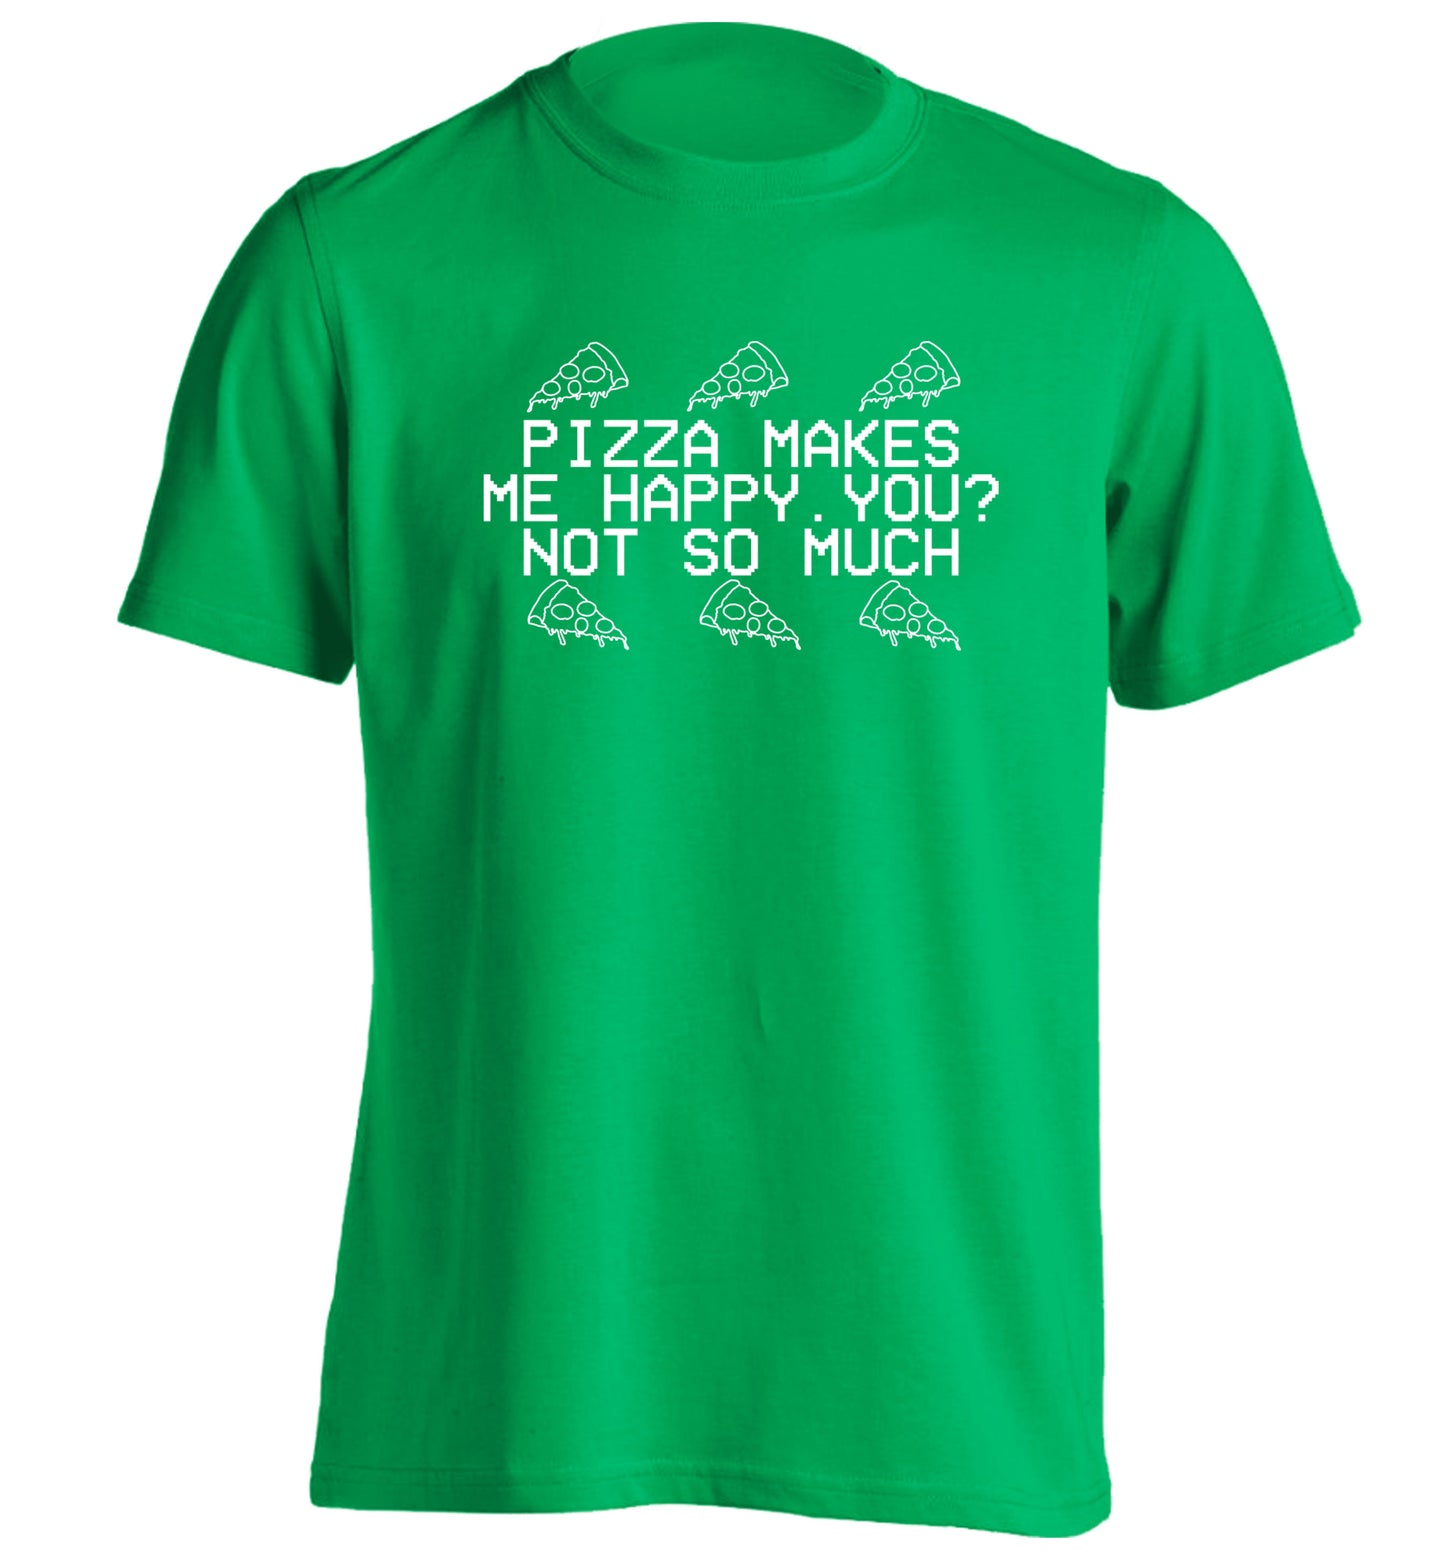 Pizza makes me happy, You? Not so much adults unisex green Tshirt 2XL